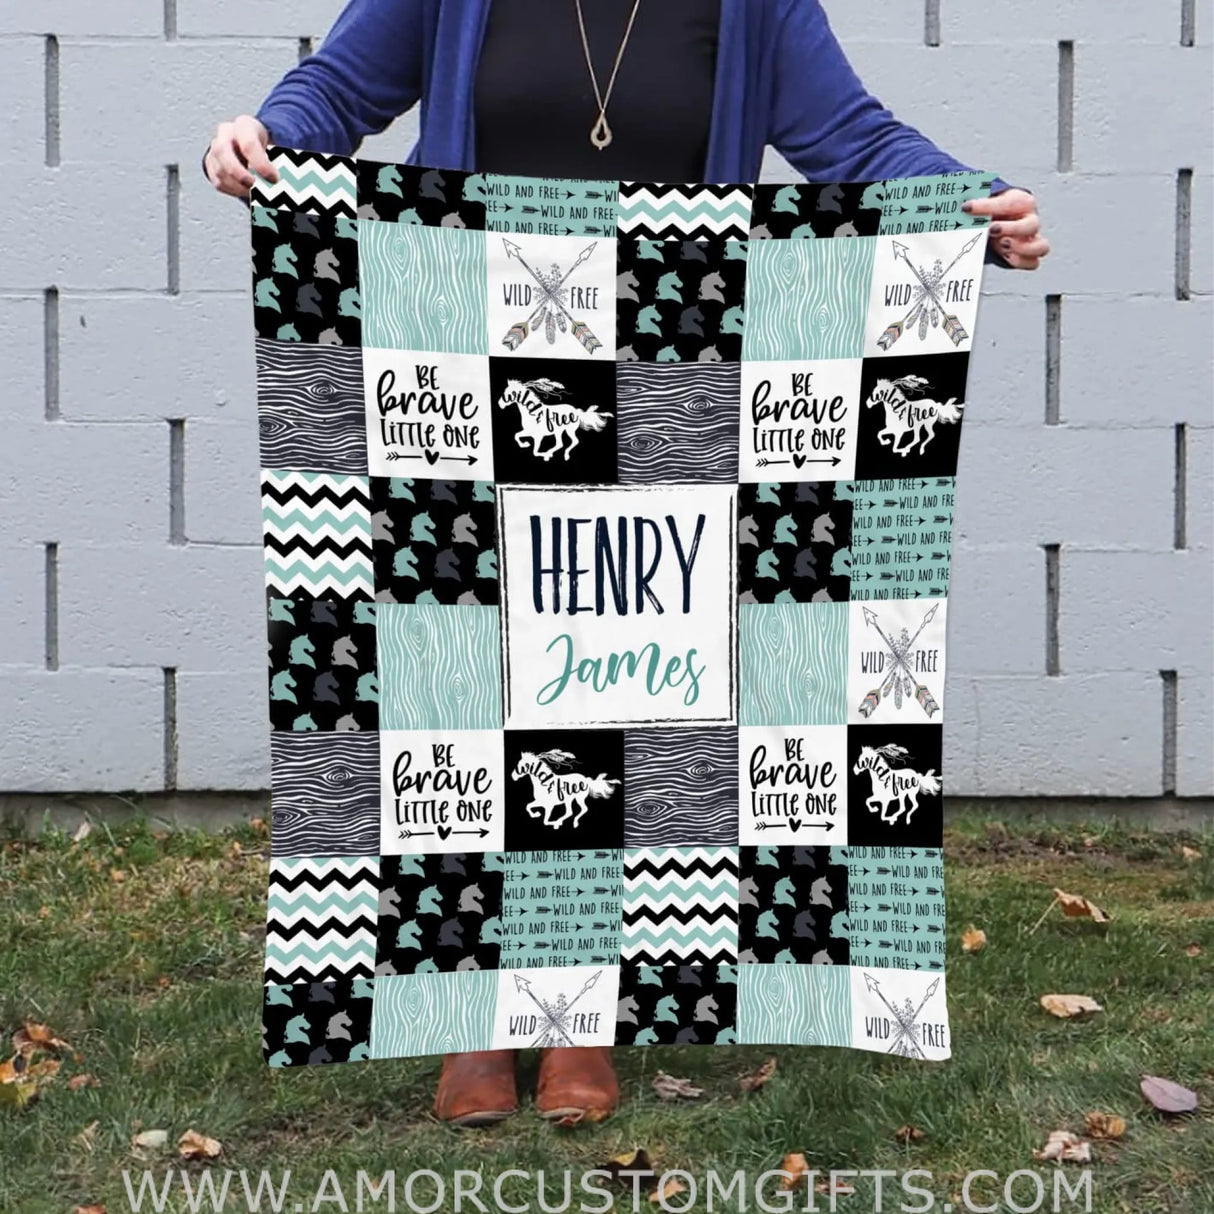 Blankets Personalized Horse Baby Blanket, Square Horse Blanket Baby Boy, Horse Blanket Boys, Horse Blanket for Boys